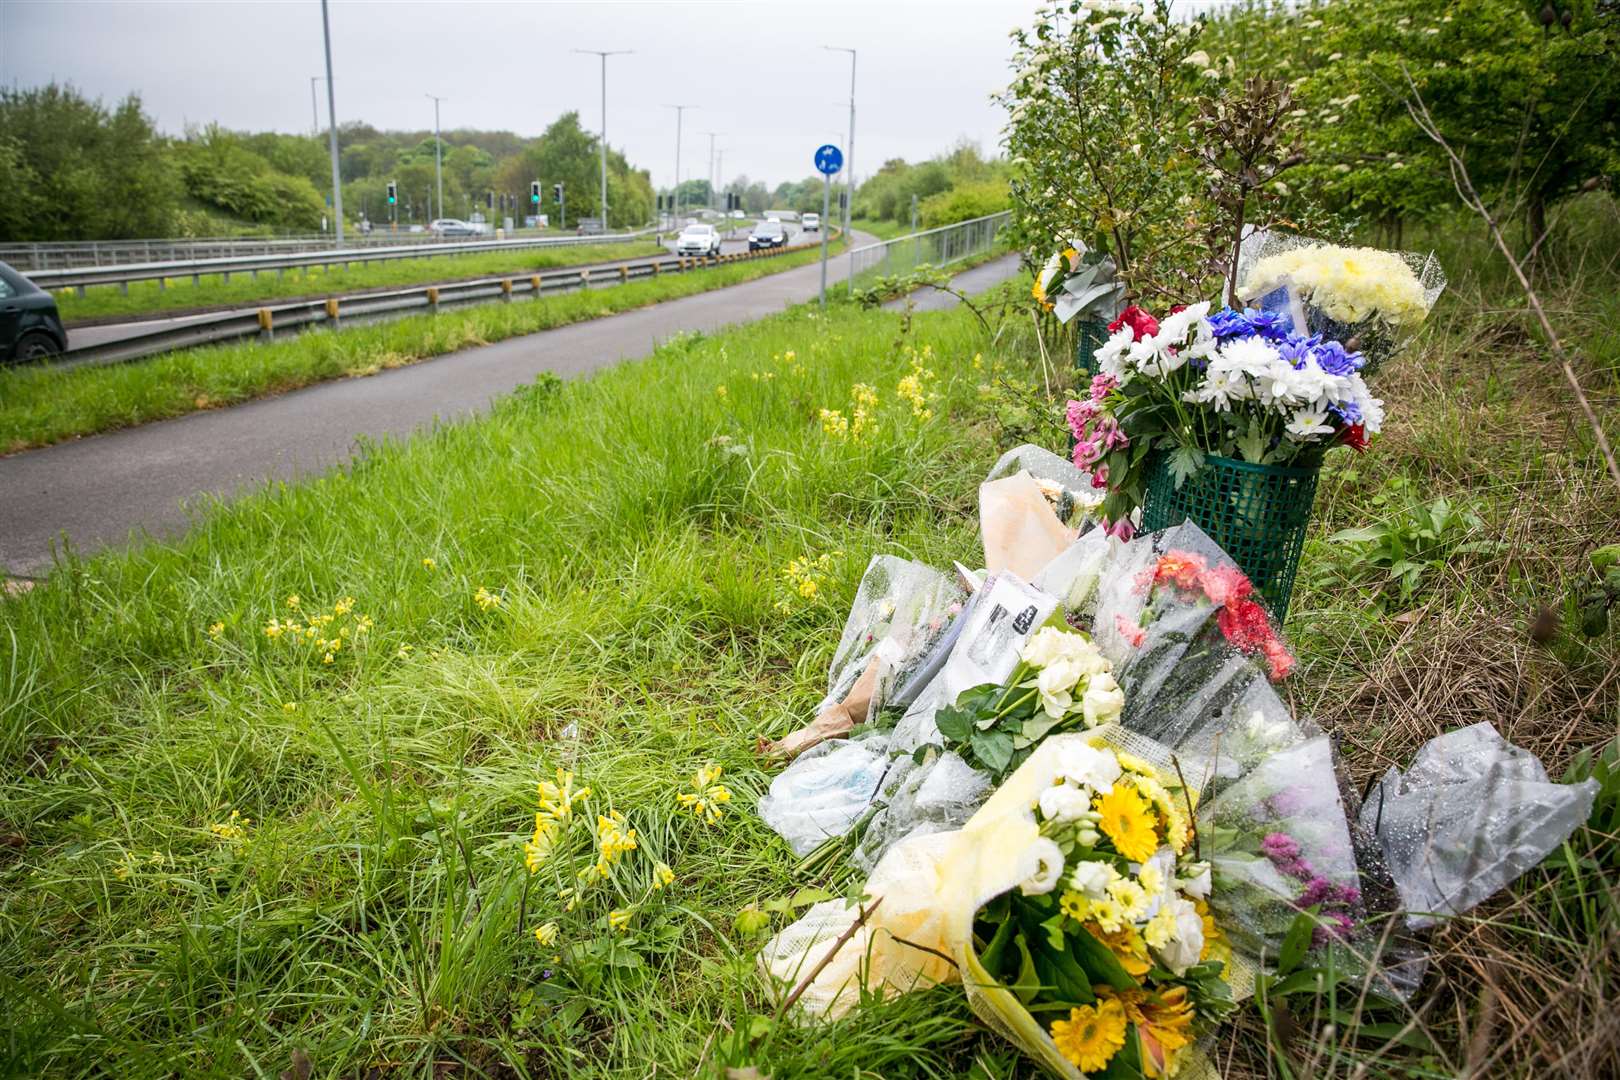 Floral tributes have been laid at the scene